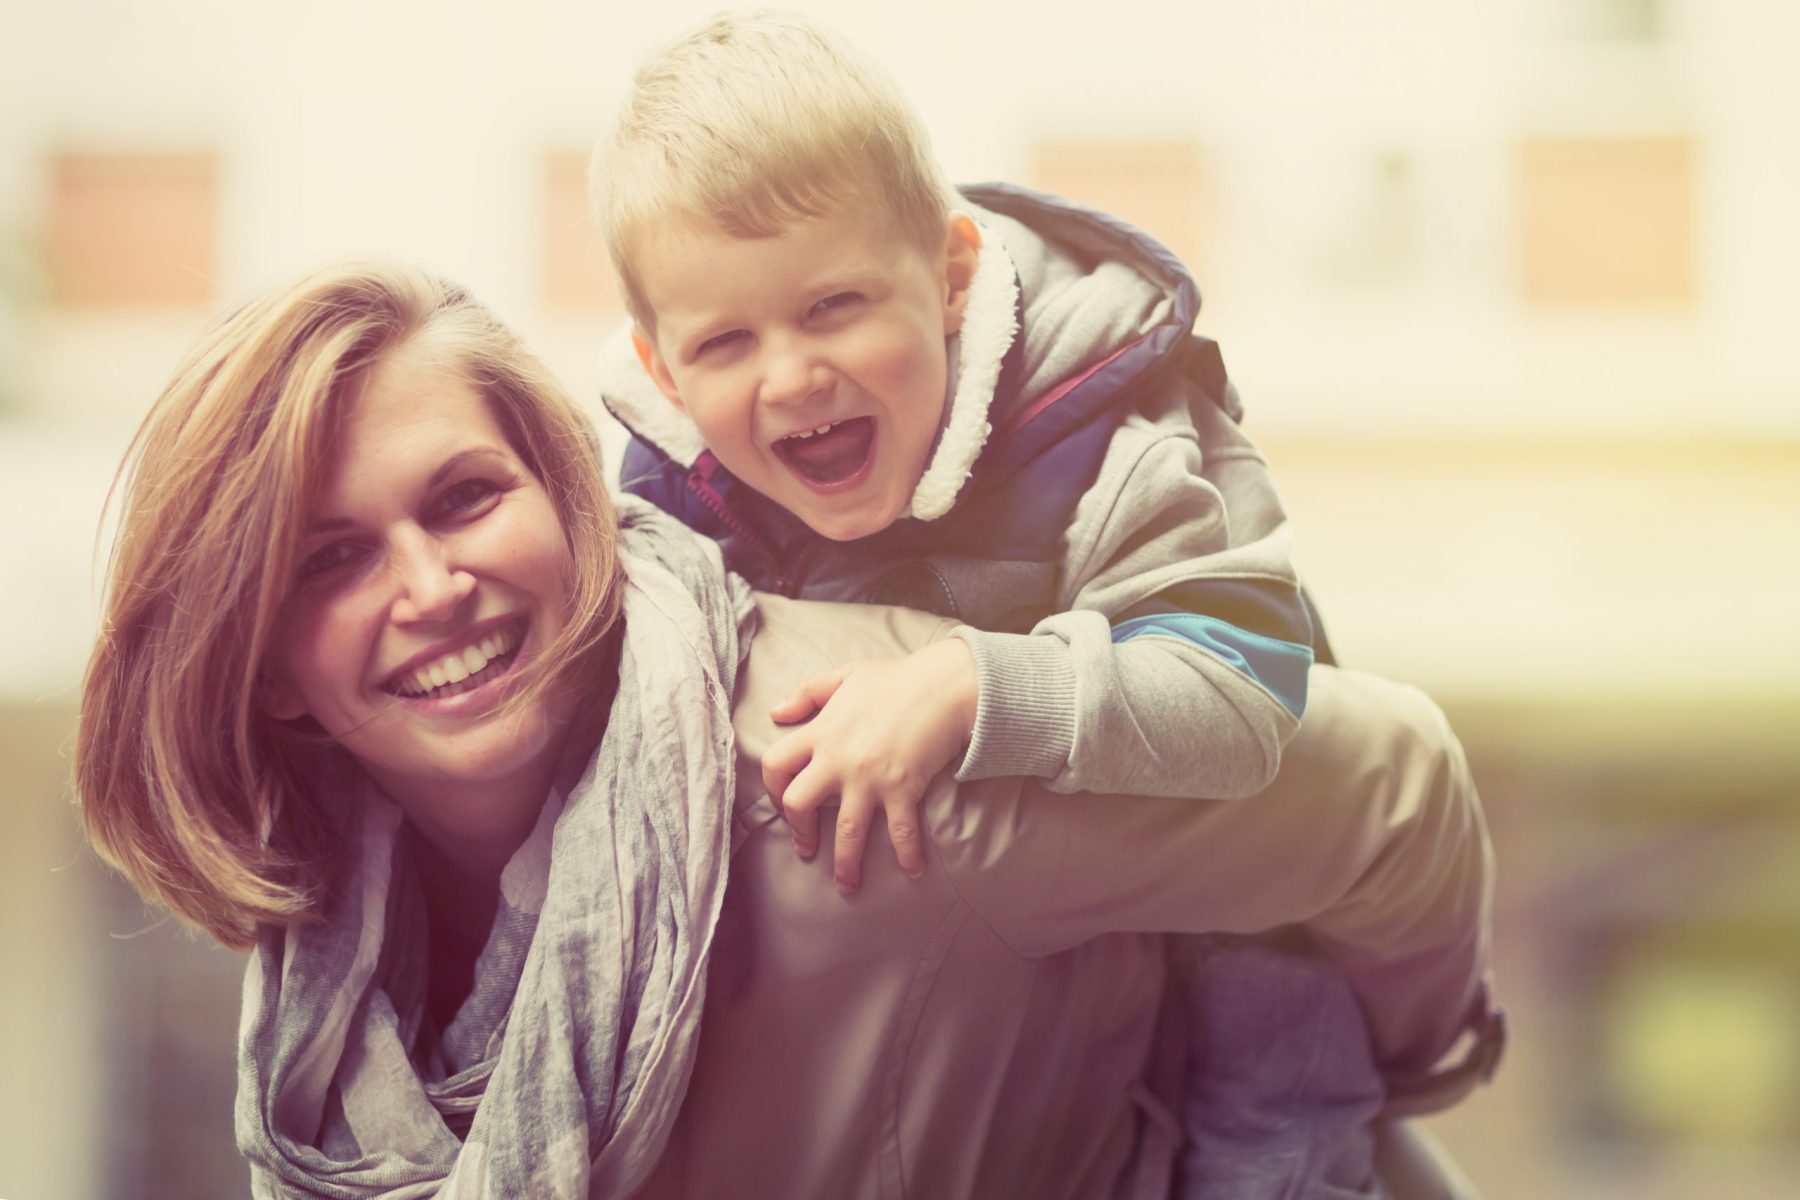 Smiling mother with son on her back, for Child Custody Lawyers Elmhurst contact our team for dependable parenting time.